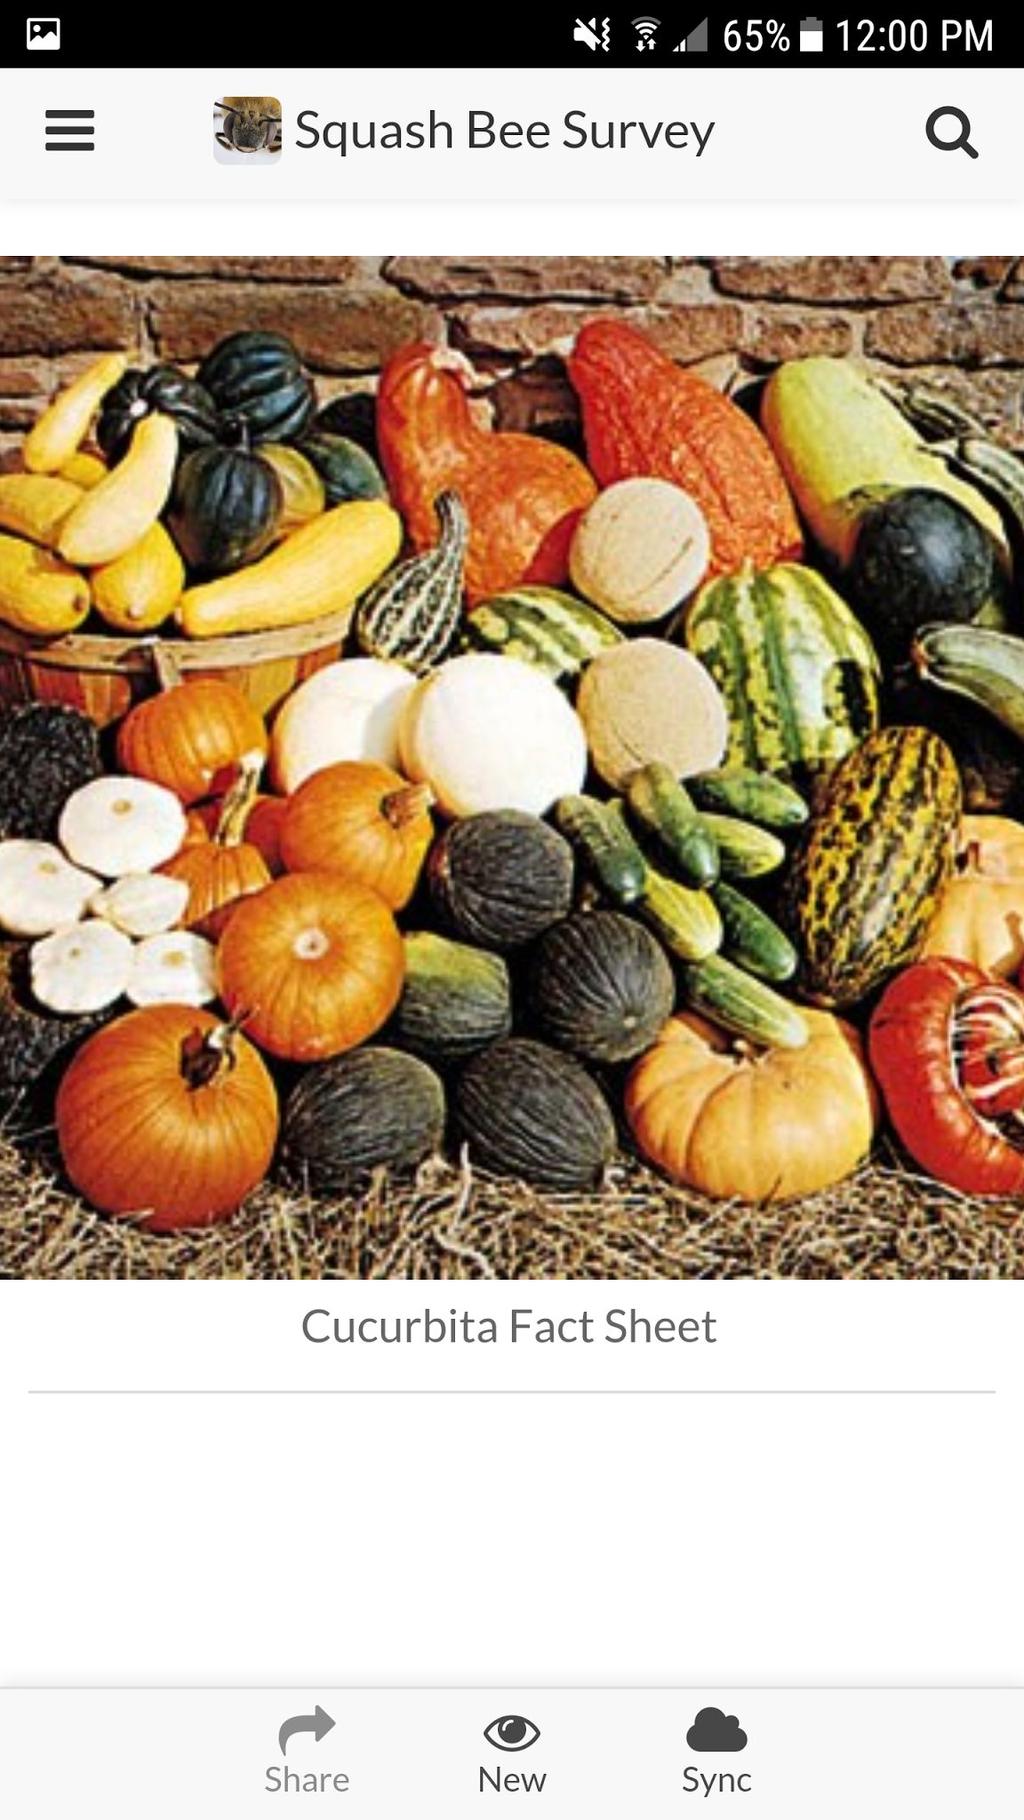 To view the Cucurbita Fact Sheet, tap on the image or